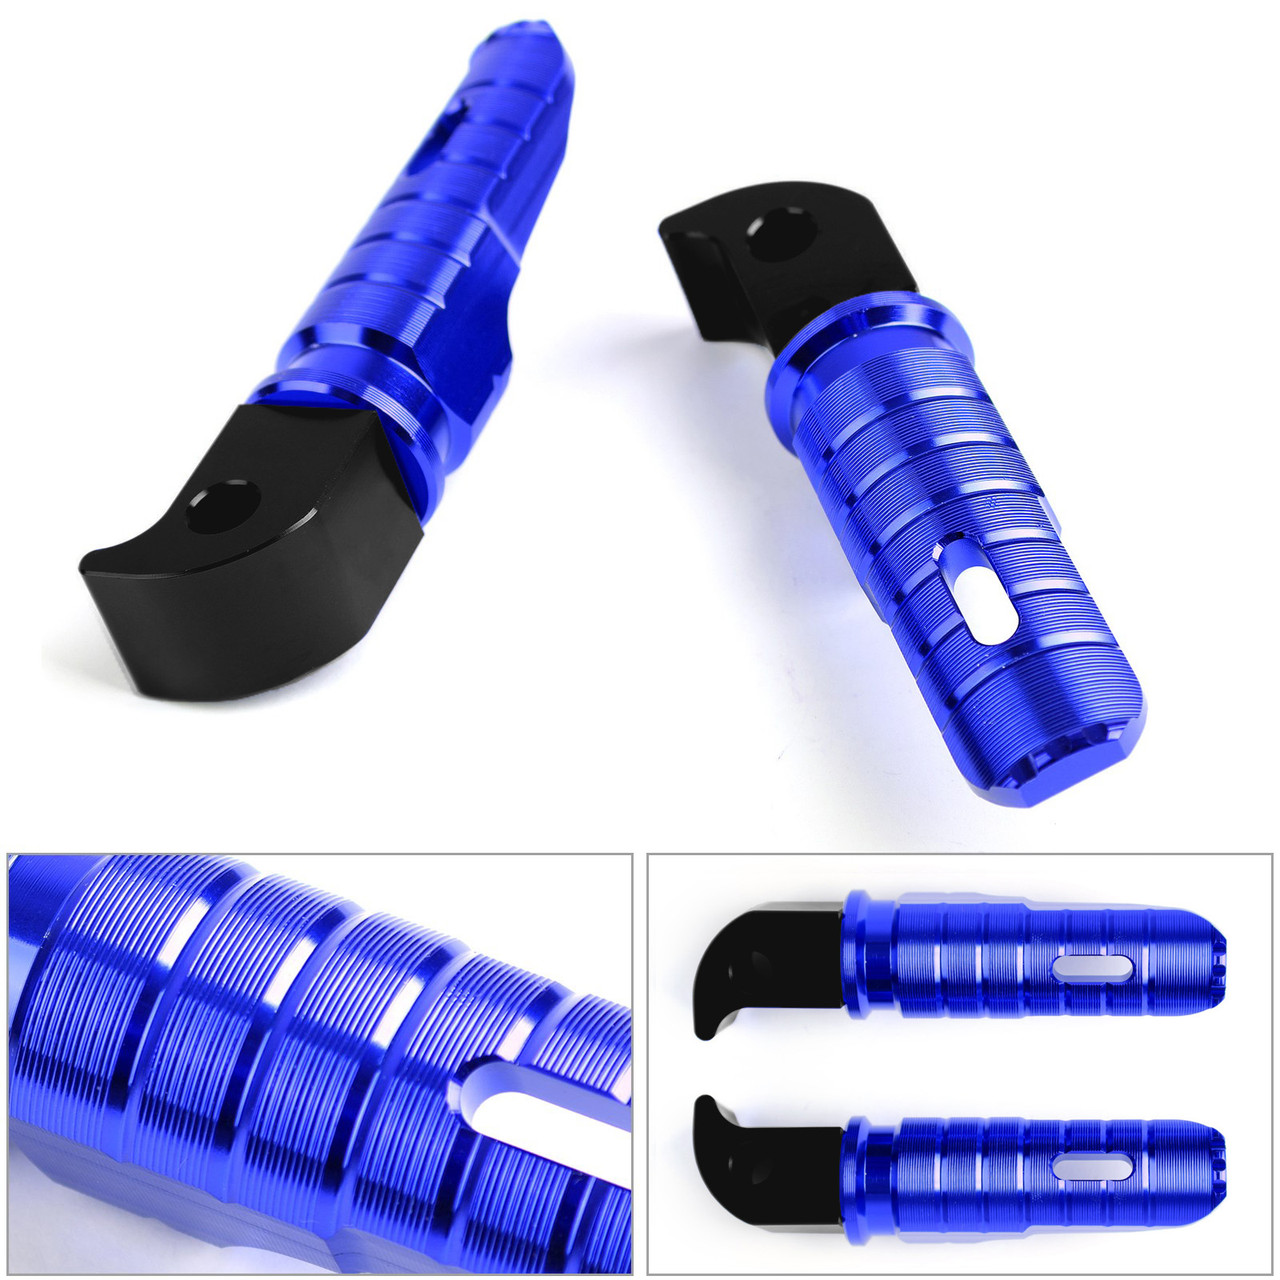 CNC Rear Foot Pegs Fits For YAMAHA MT10 03 FZ-10 16-18 Tracer900 15-18 FZ-6N/S 04-09 YZF-R3 15-18 Blue